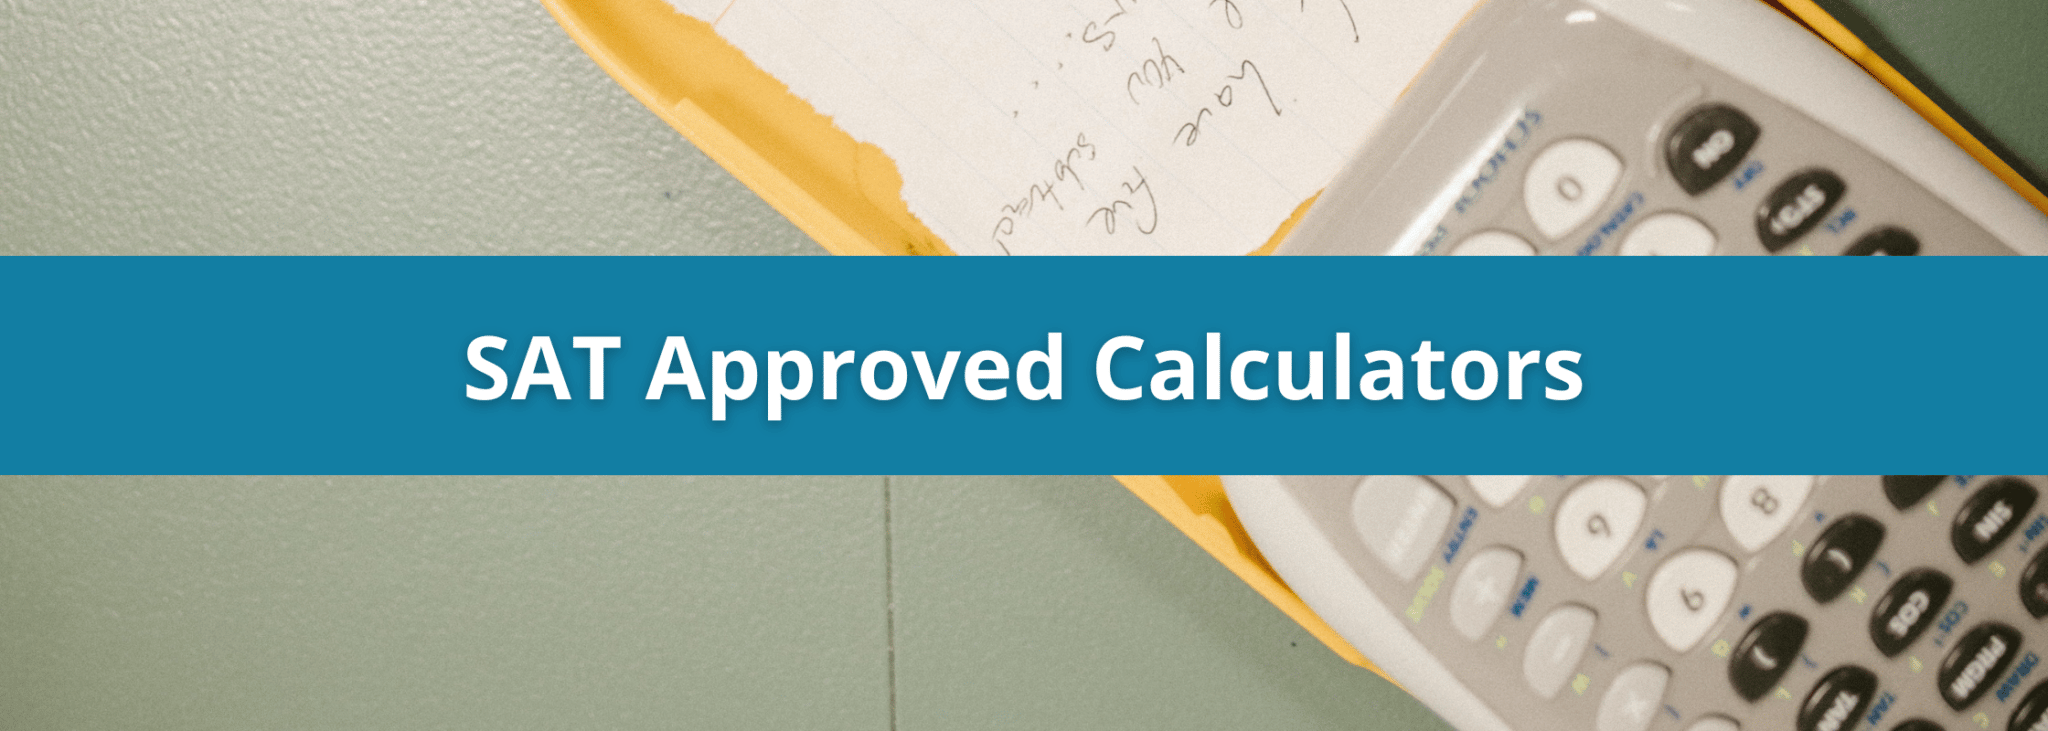 A list of SAT approved calculators